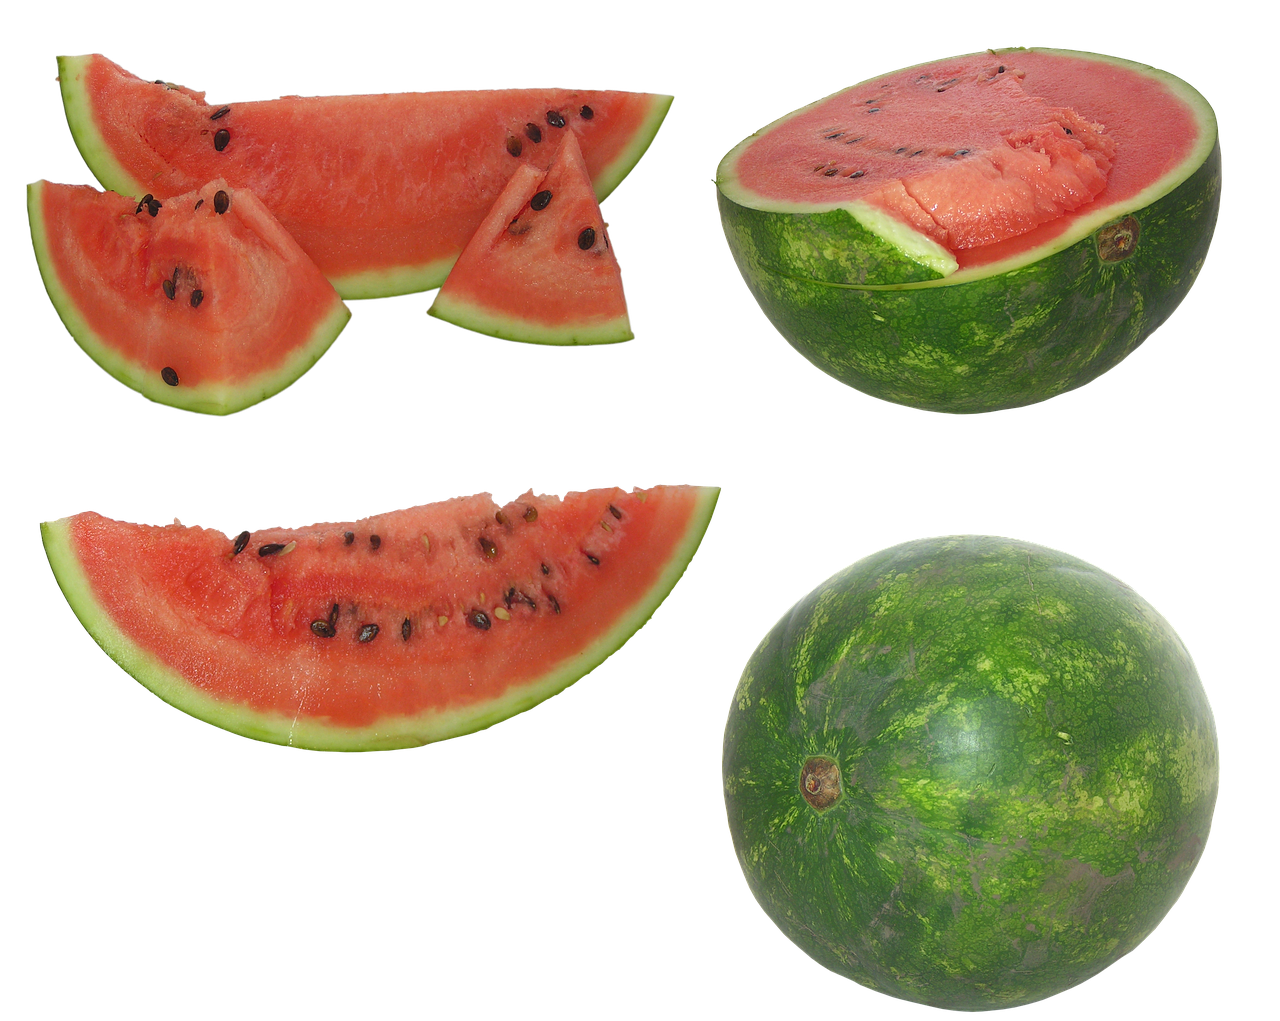 Watermelon,watermelons,fresh,fruit,eating - free image from needpix.com